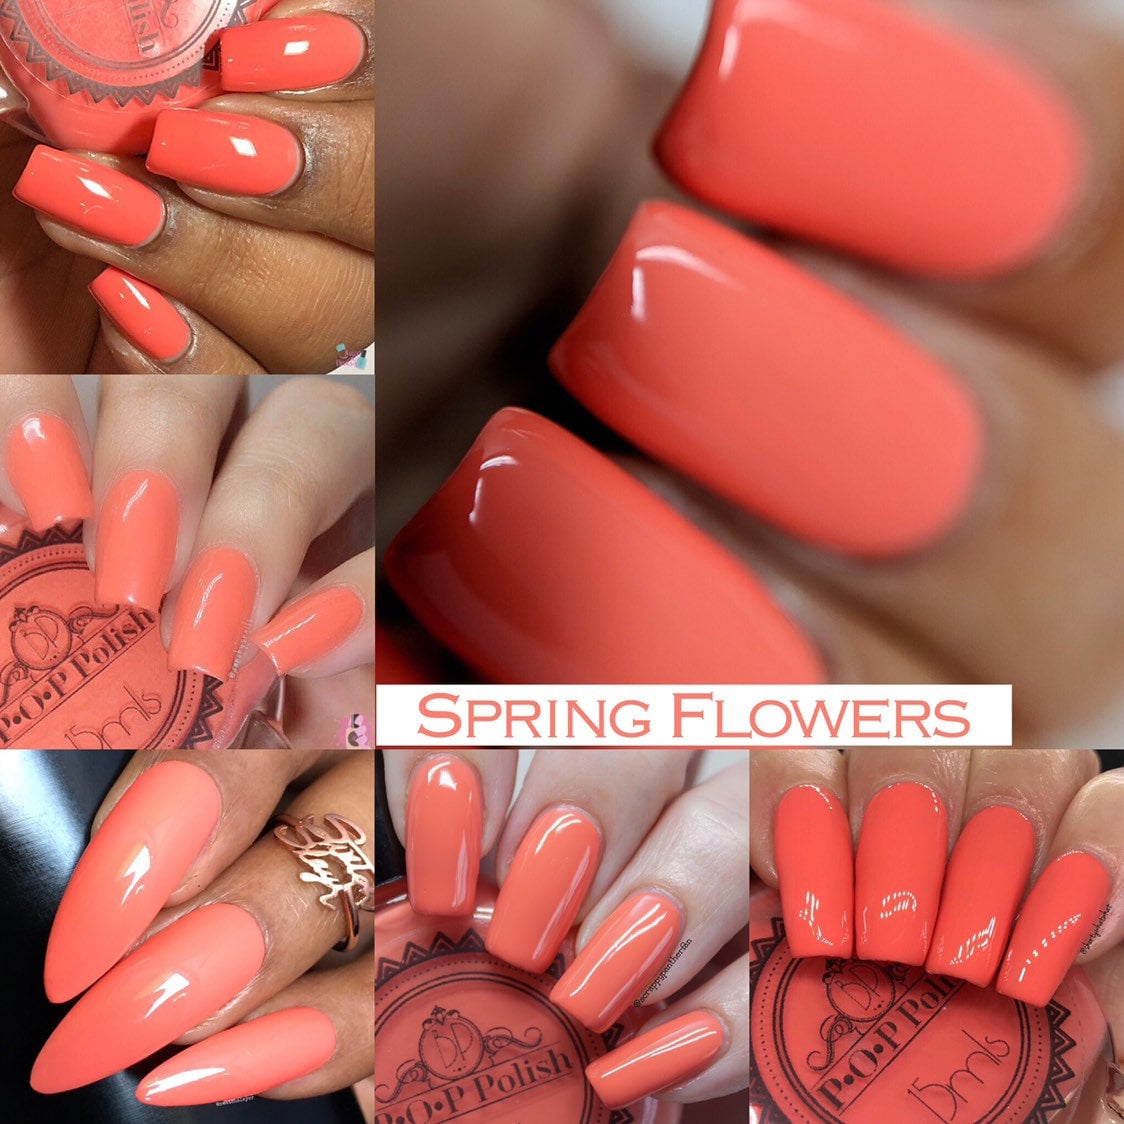 P.O.P Spring Flowers the Cream Spring Collection Coral Pink 